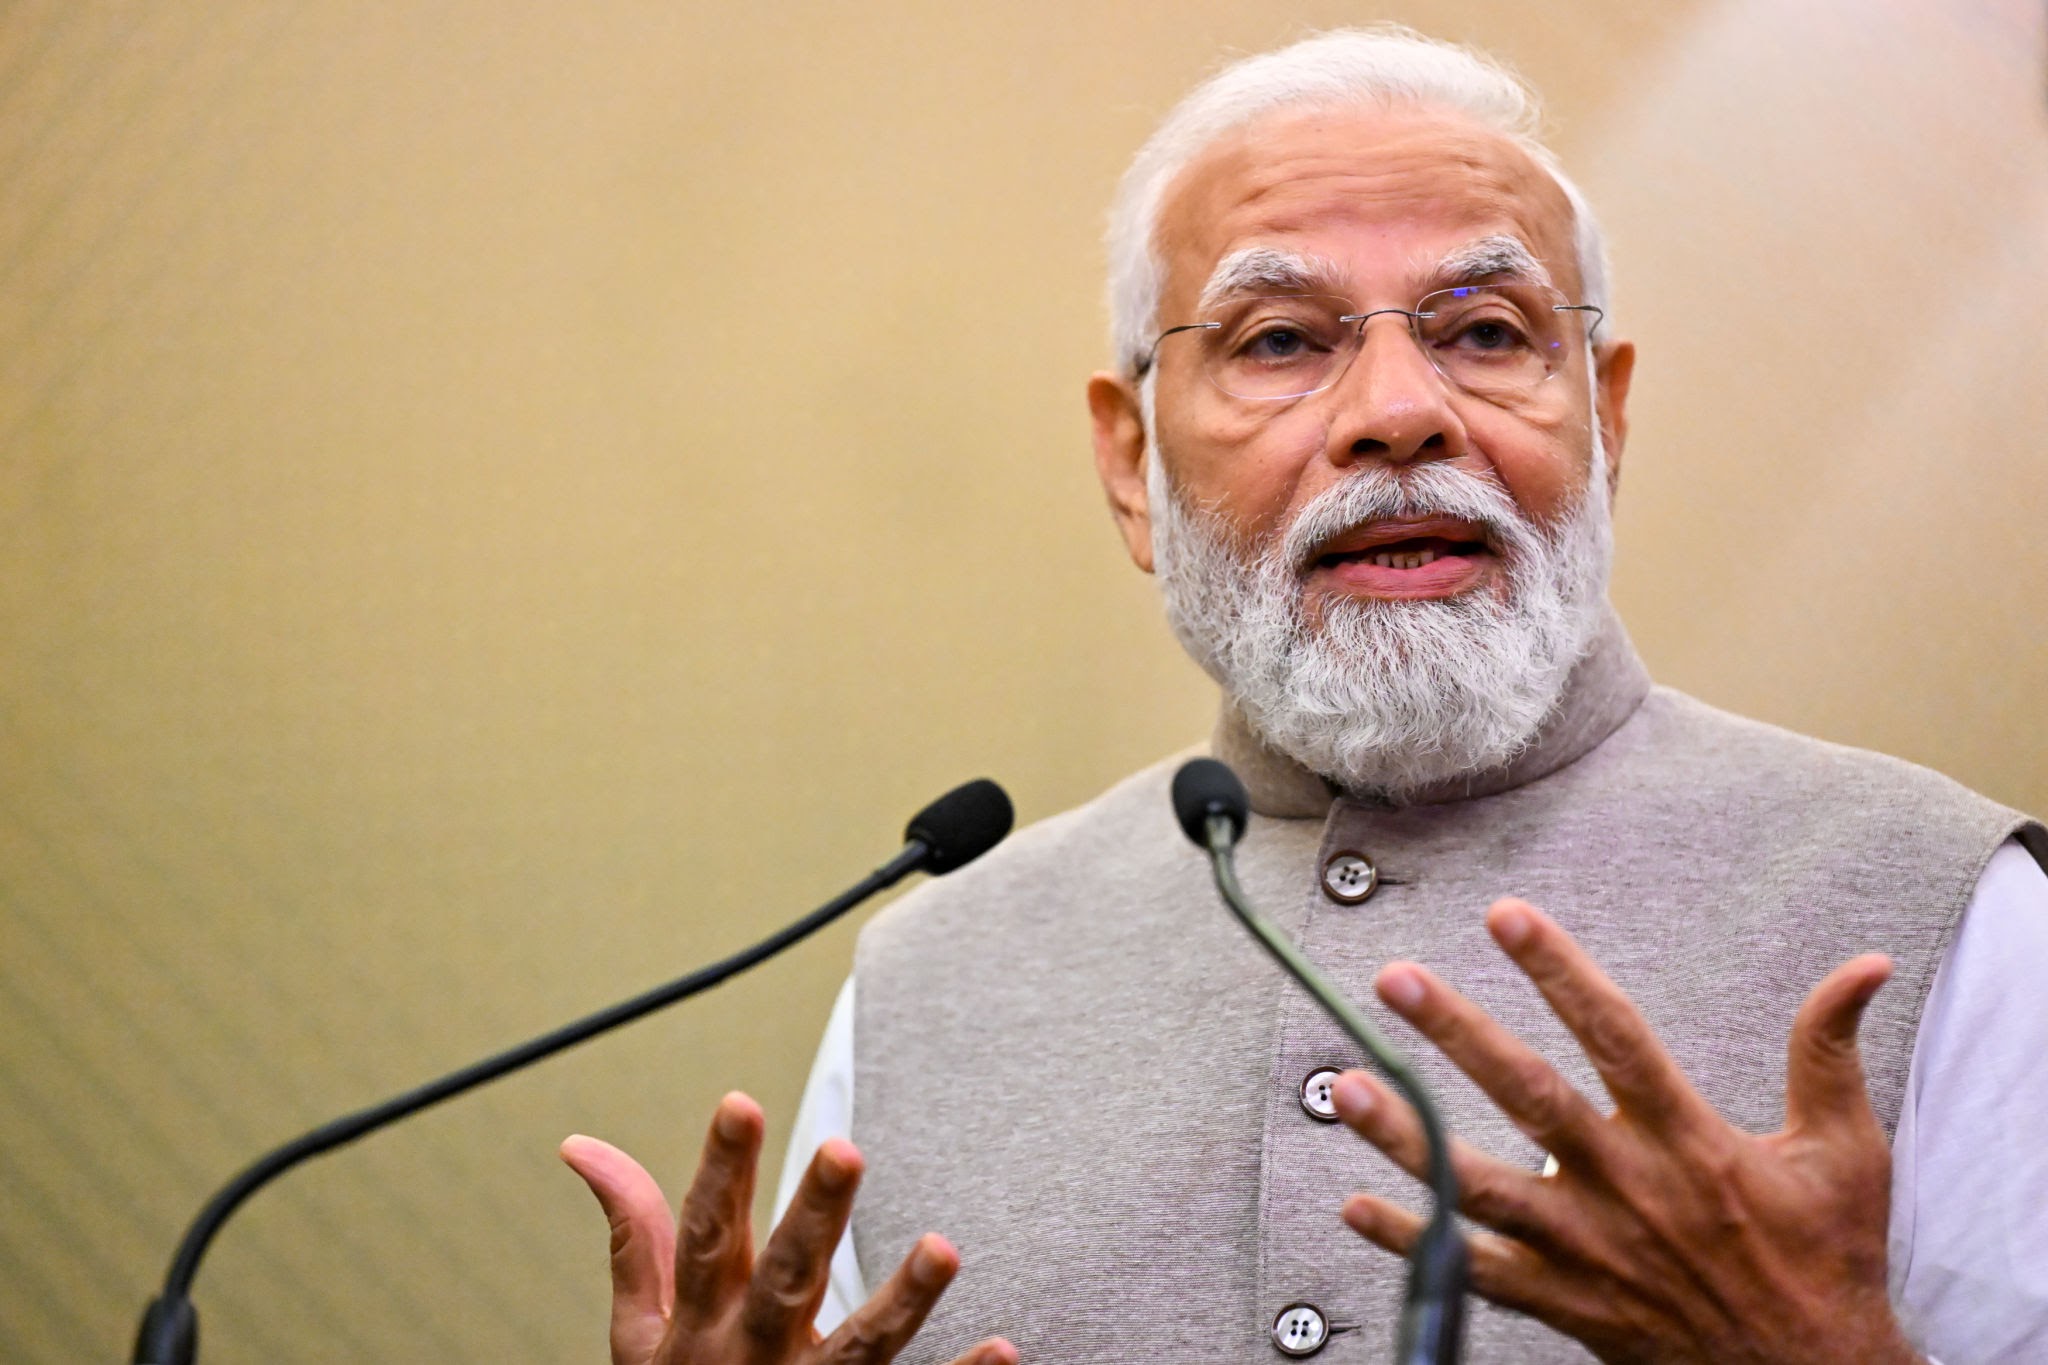 PM Modi elevates India’s global standing at G20